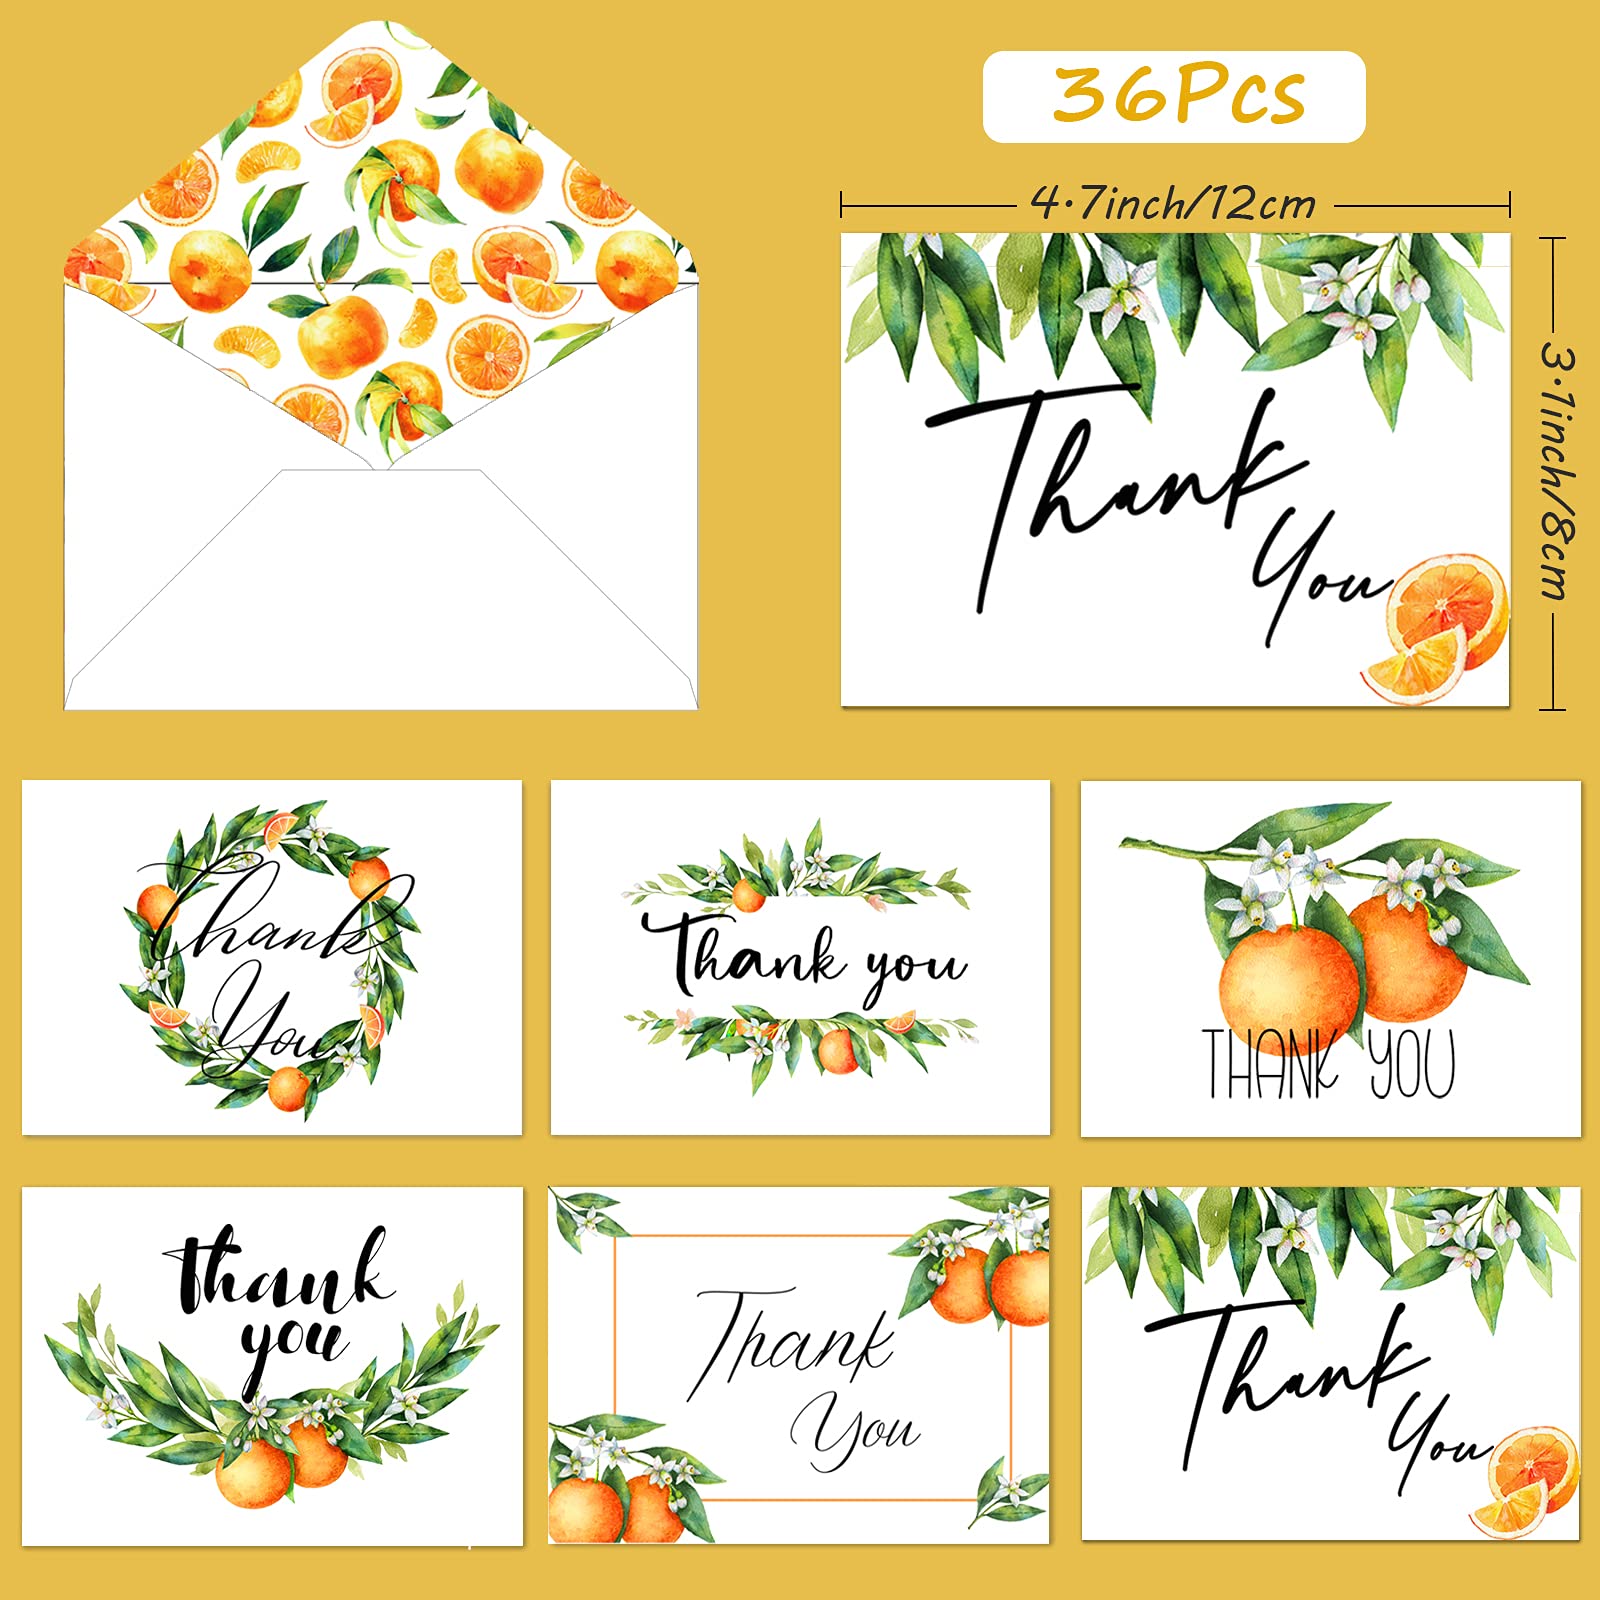 72 Pieces Orange Thank You Cards Includes 36 Pieces Orange Envelopes and 36 Pieces Orange Green Leaves Greeting Cards Watercolor Orange Blank Notes Cards for Birthday Party Baby Shower Thanksgiving